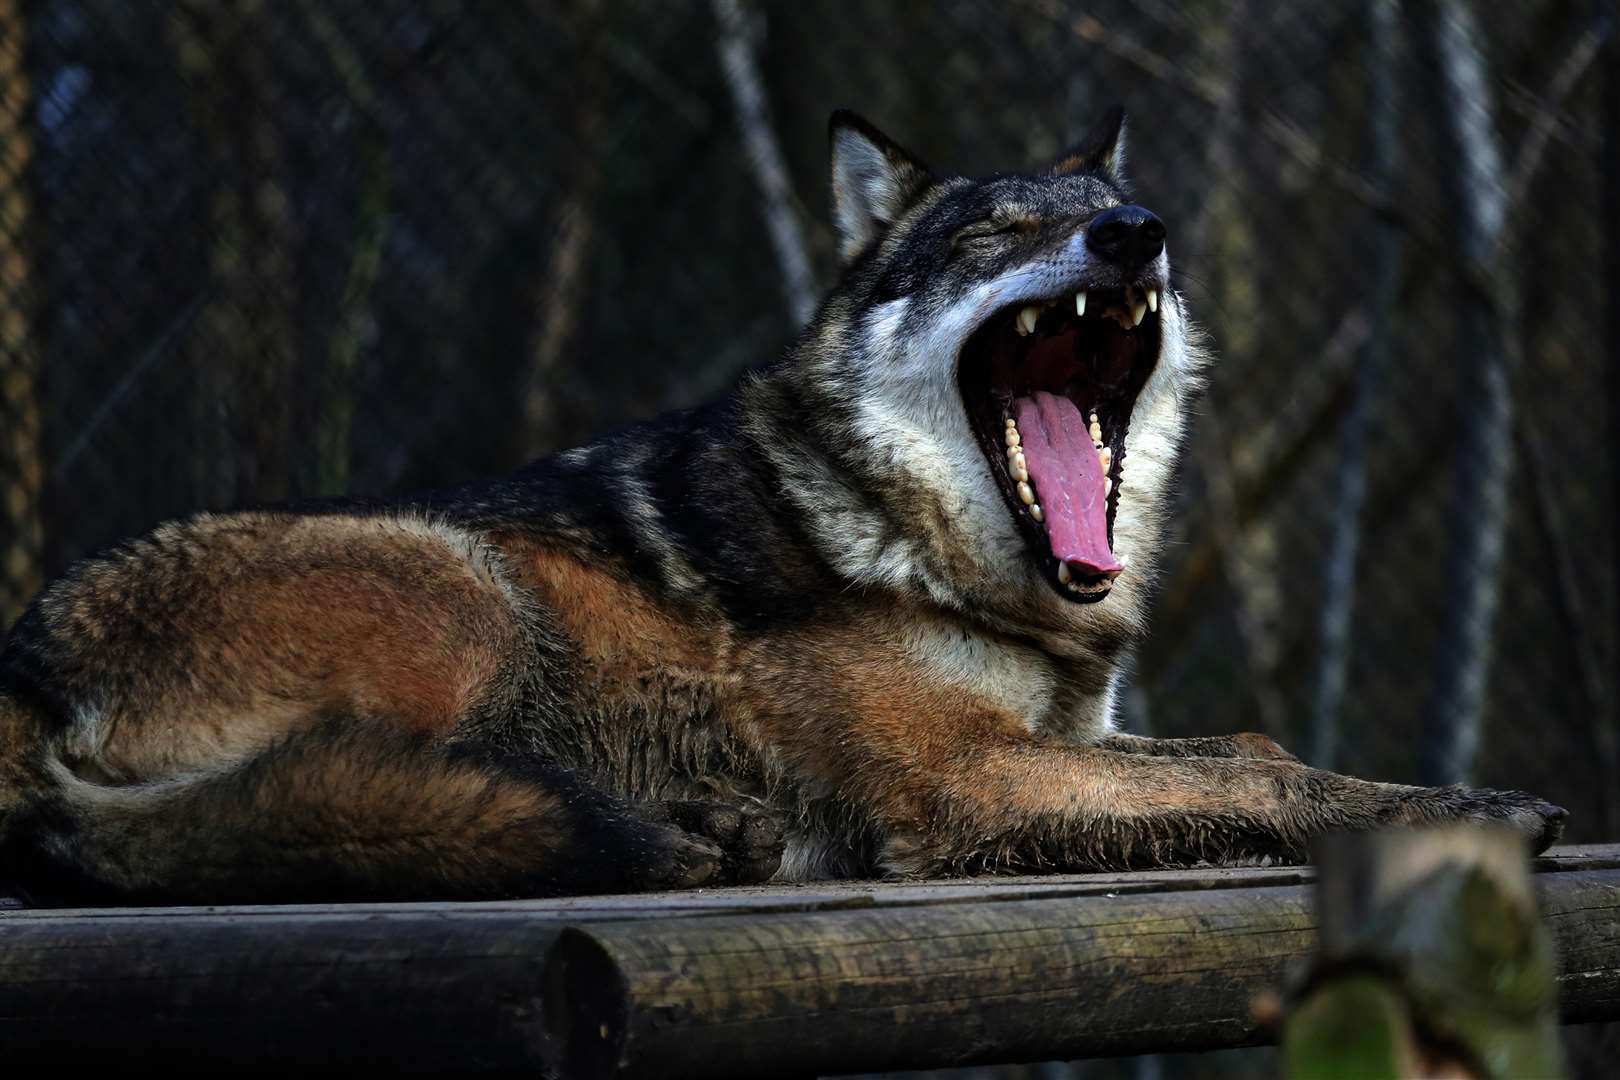 Open wide - a wolf bares its teeth at Wildwood (1221937)